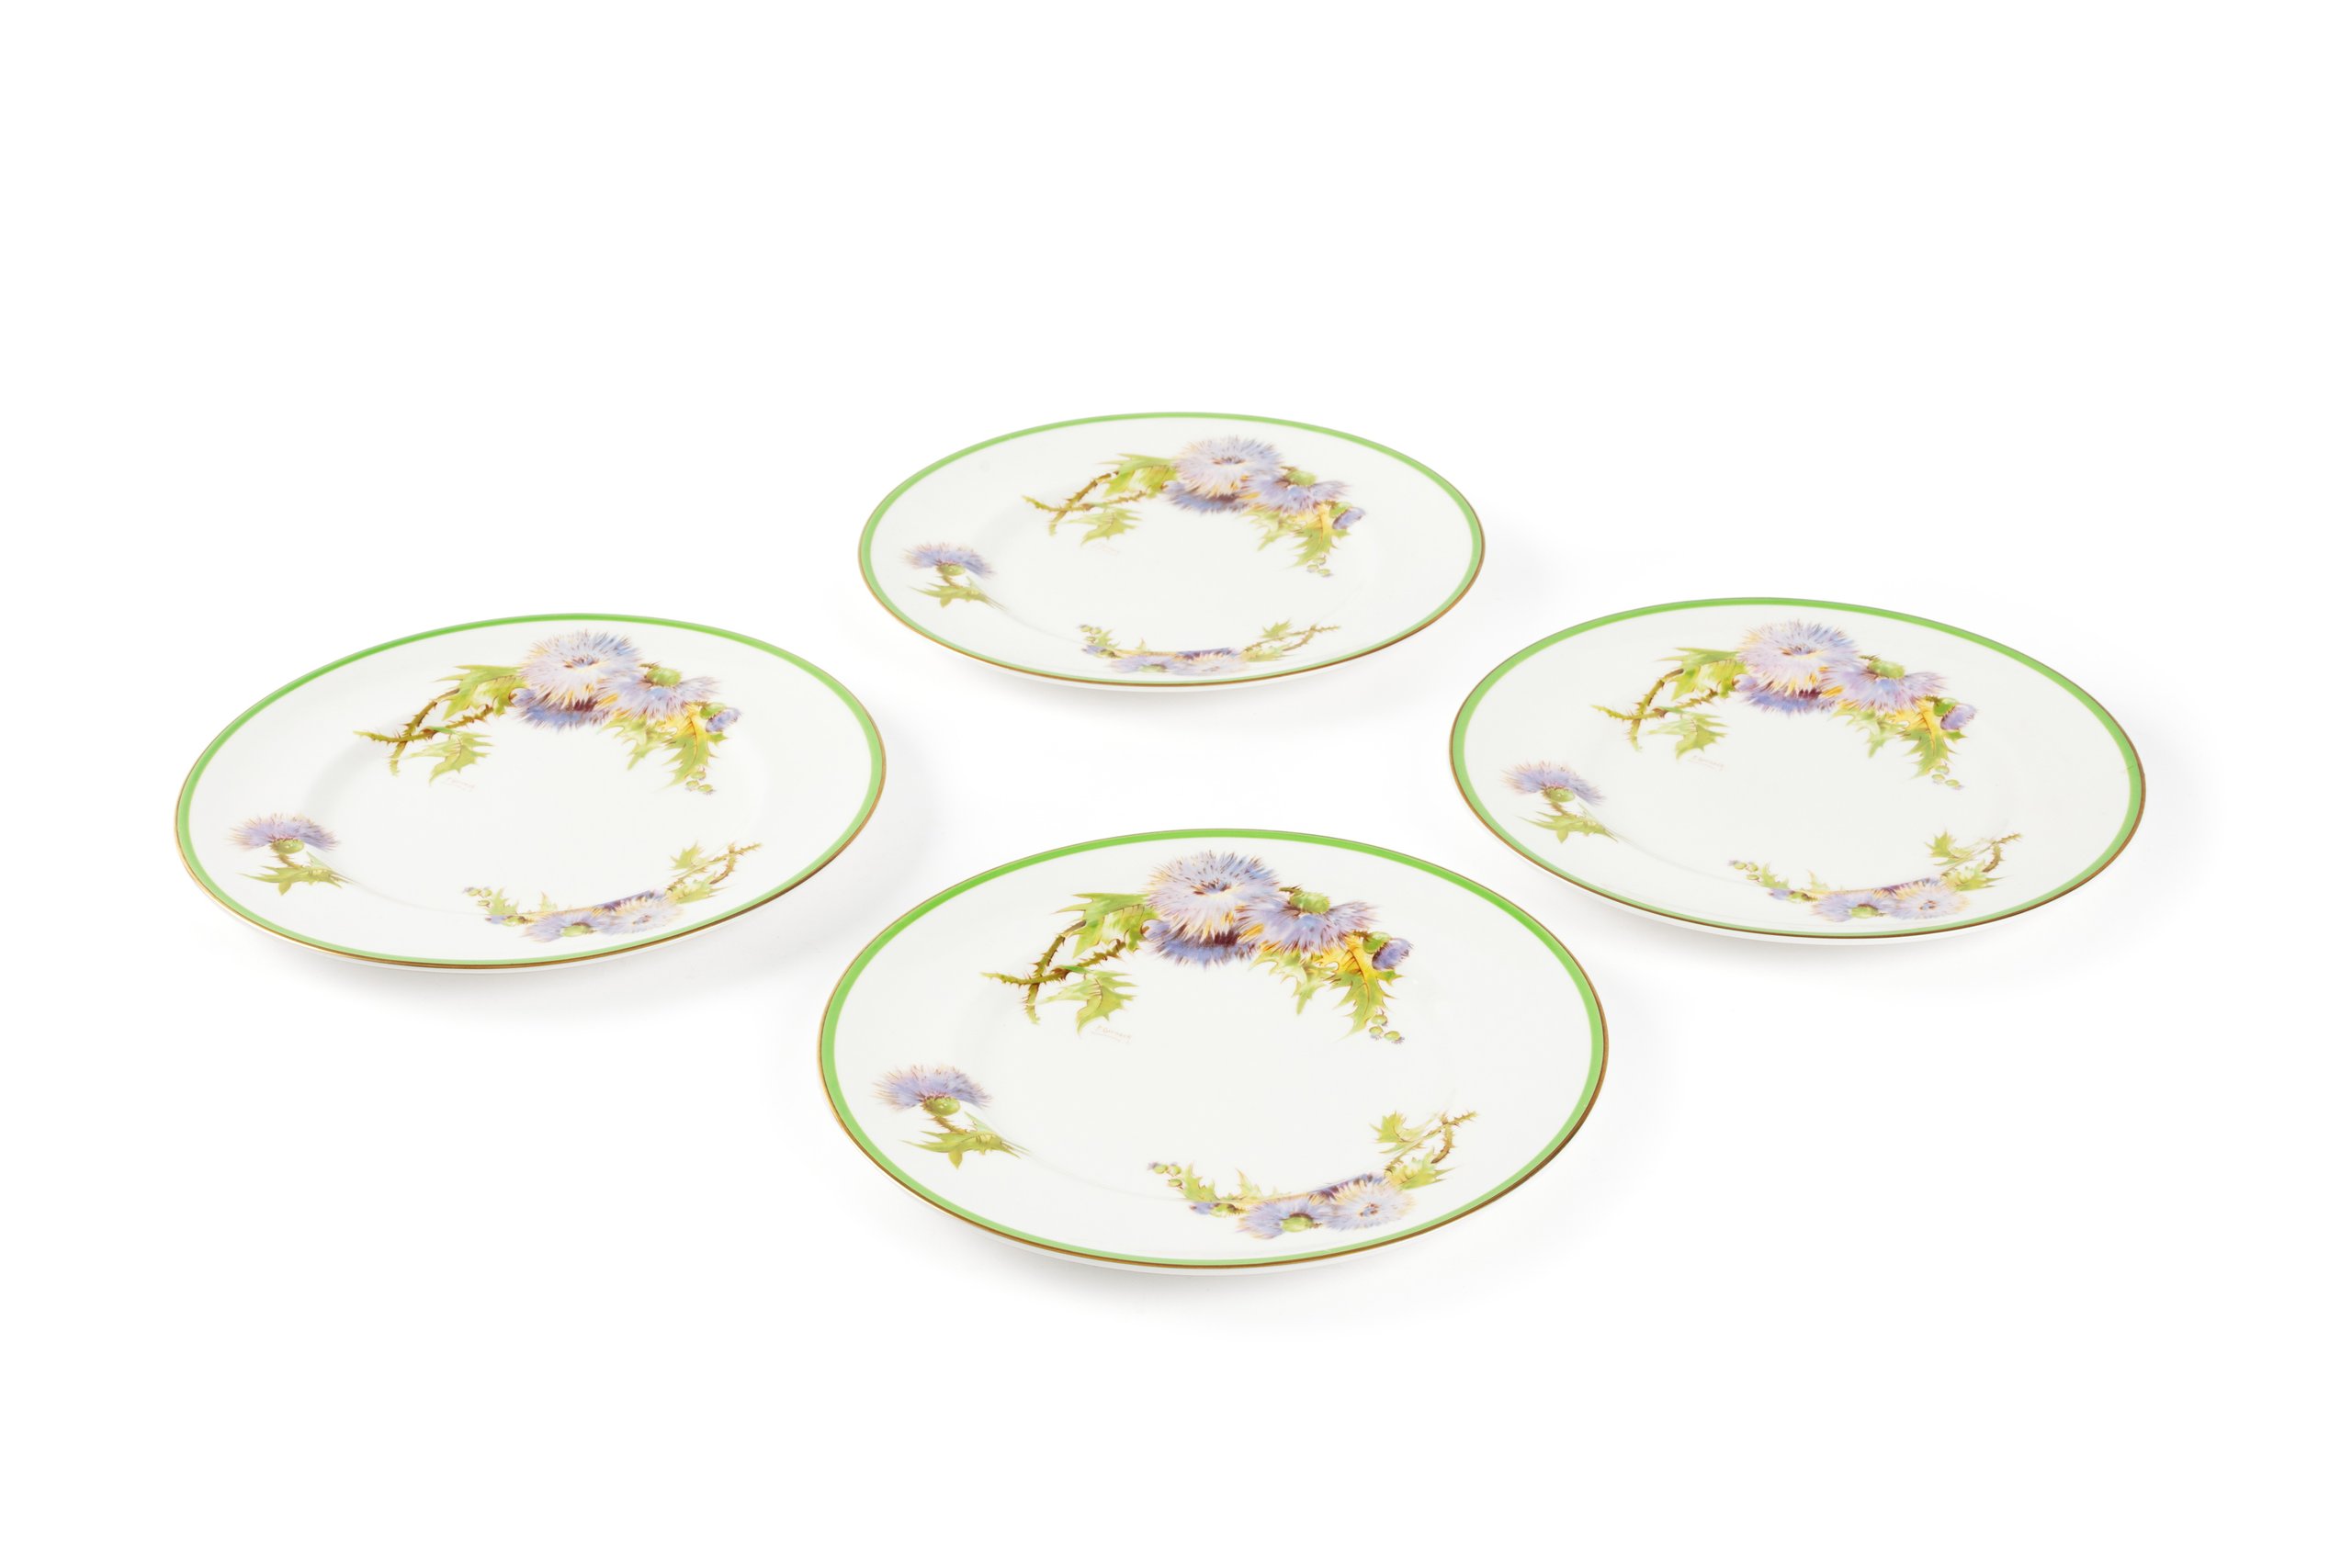 Dinner plates designed by Percy Curnock for Royal Doulton